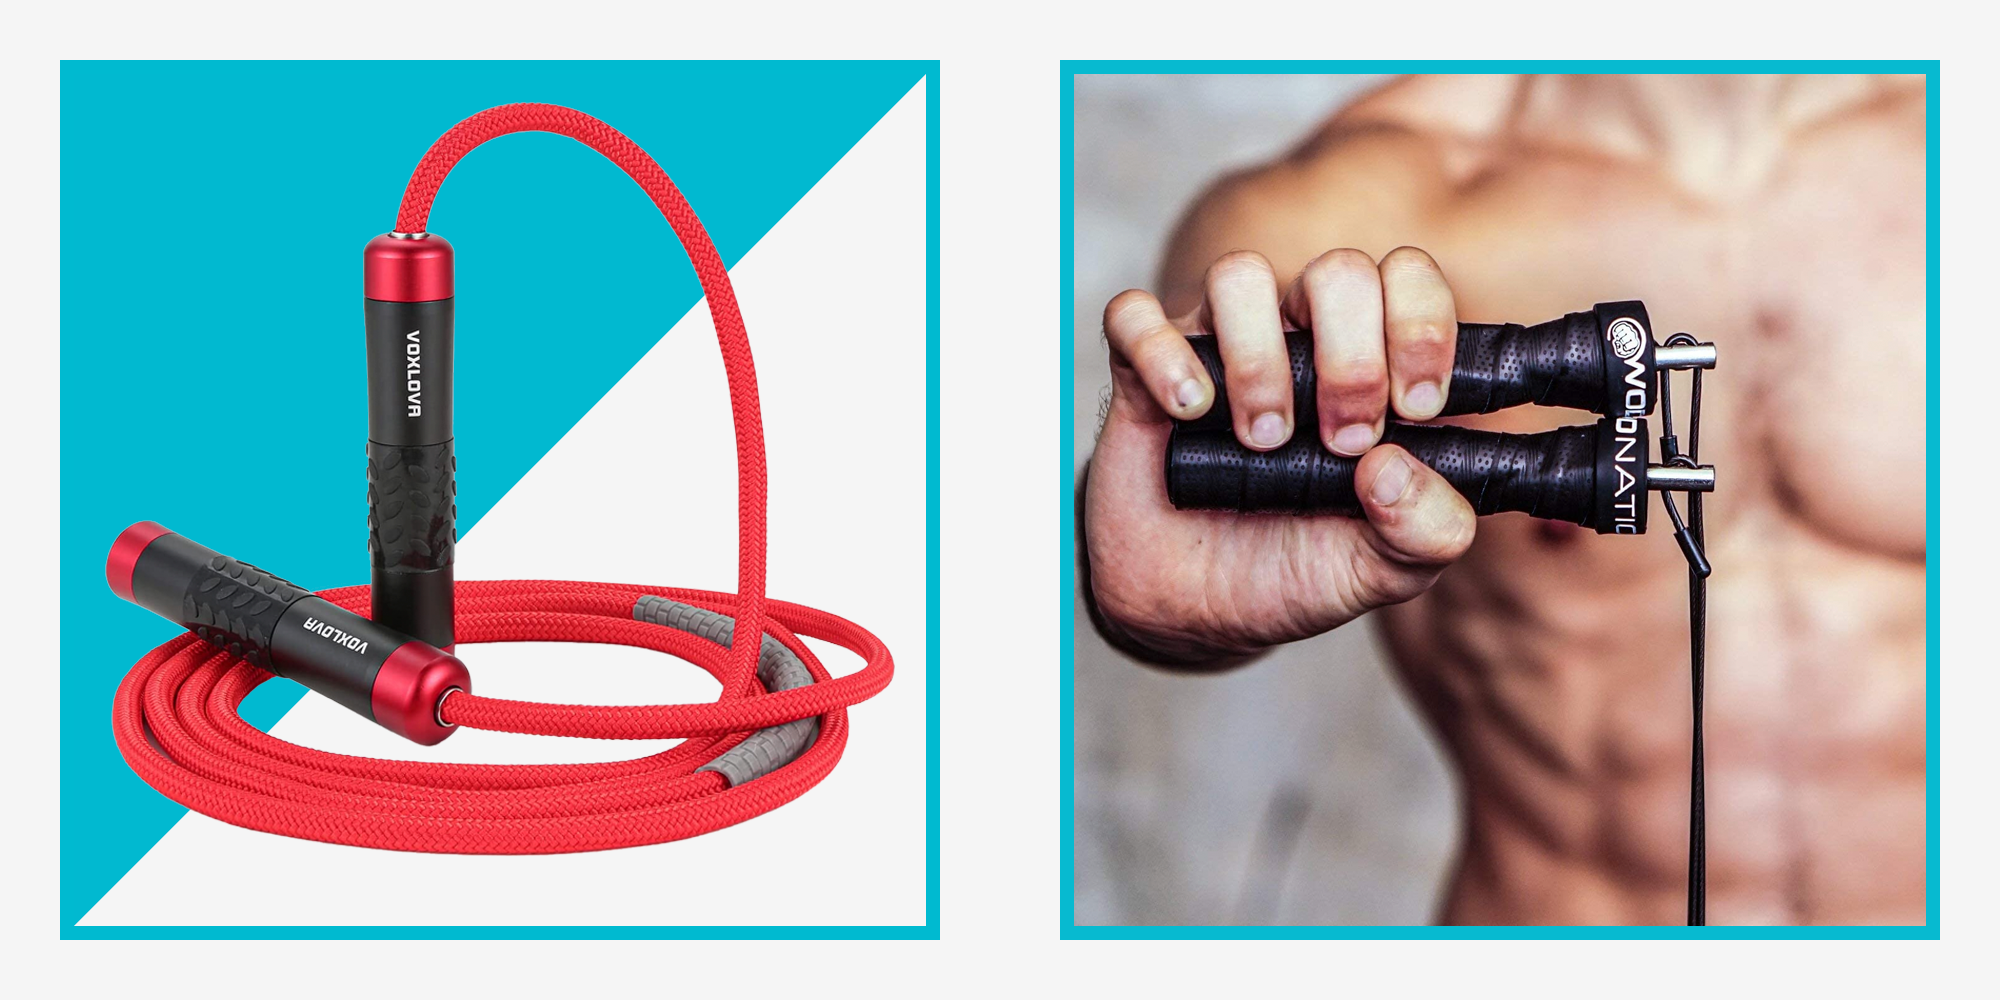 10 Best Jump Ropes for Every Type of Workout 2022